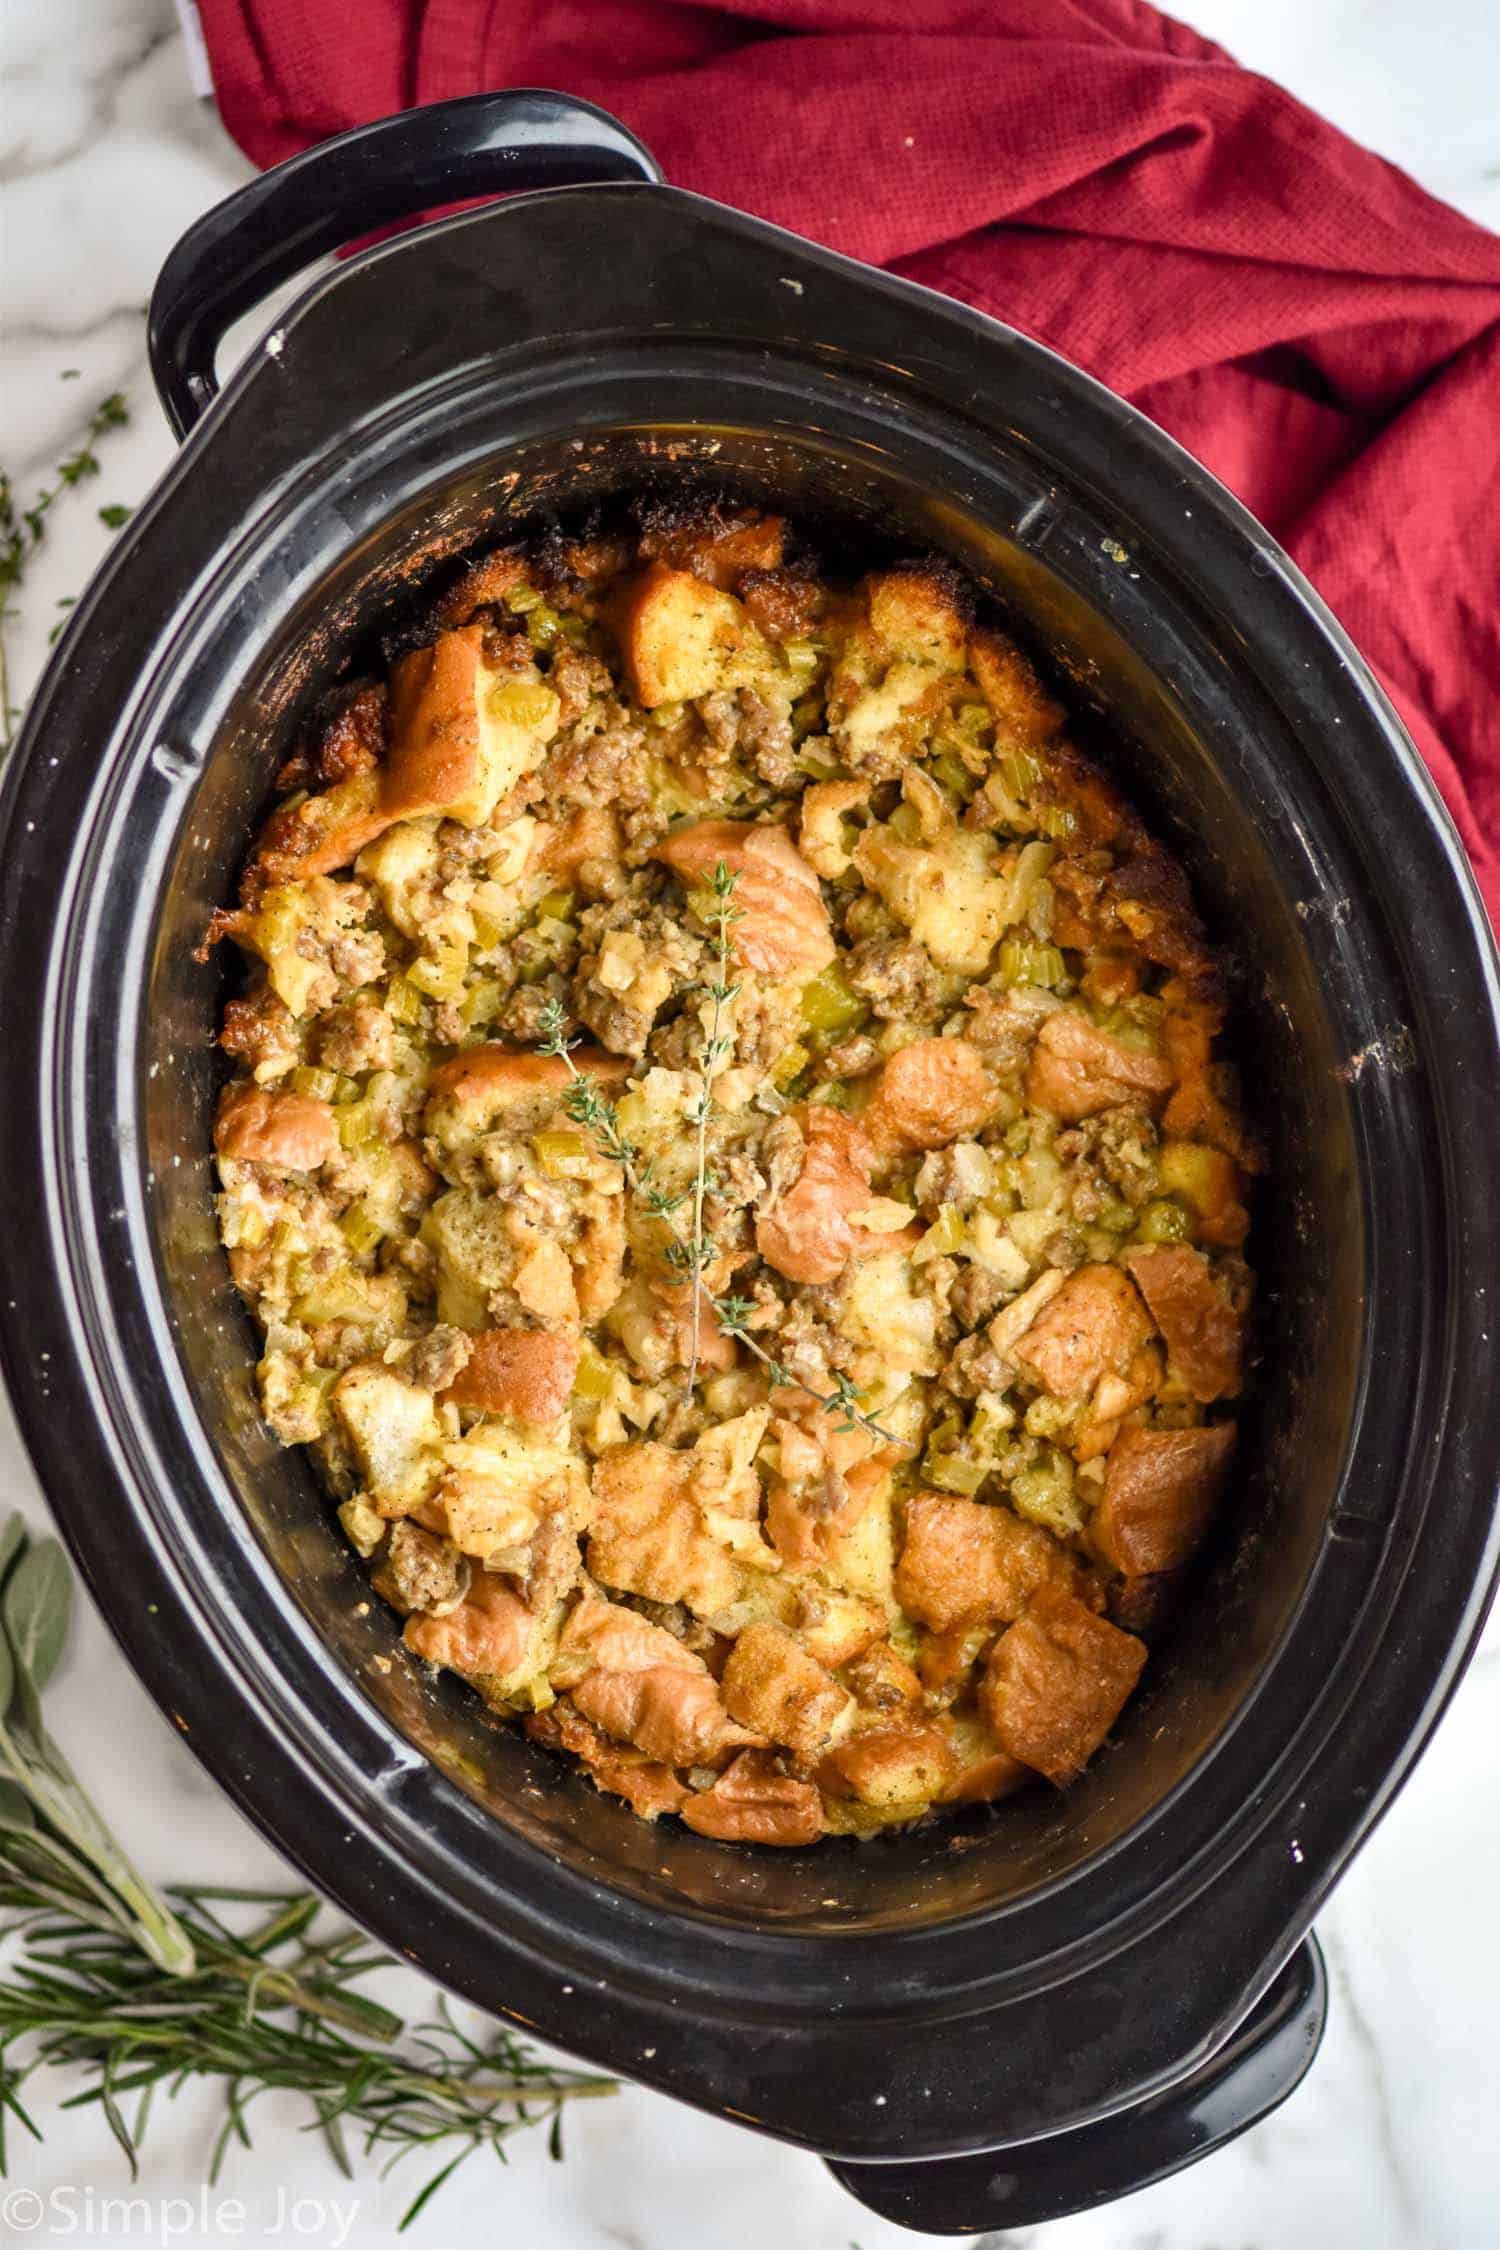 Crockpot Broccoli Casserole with Stuffing - The Vintage Cook